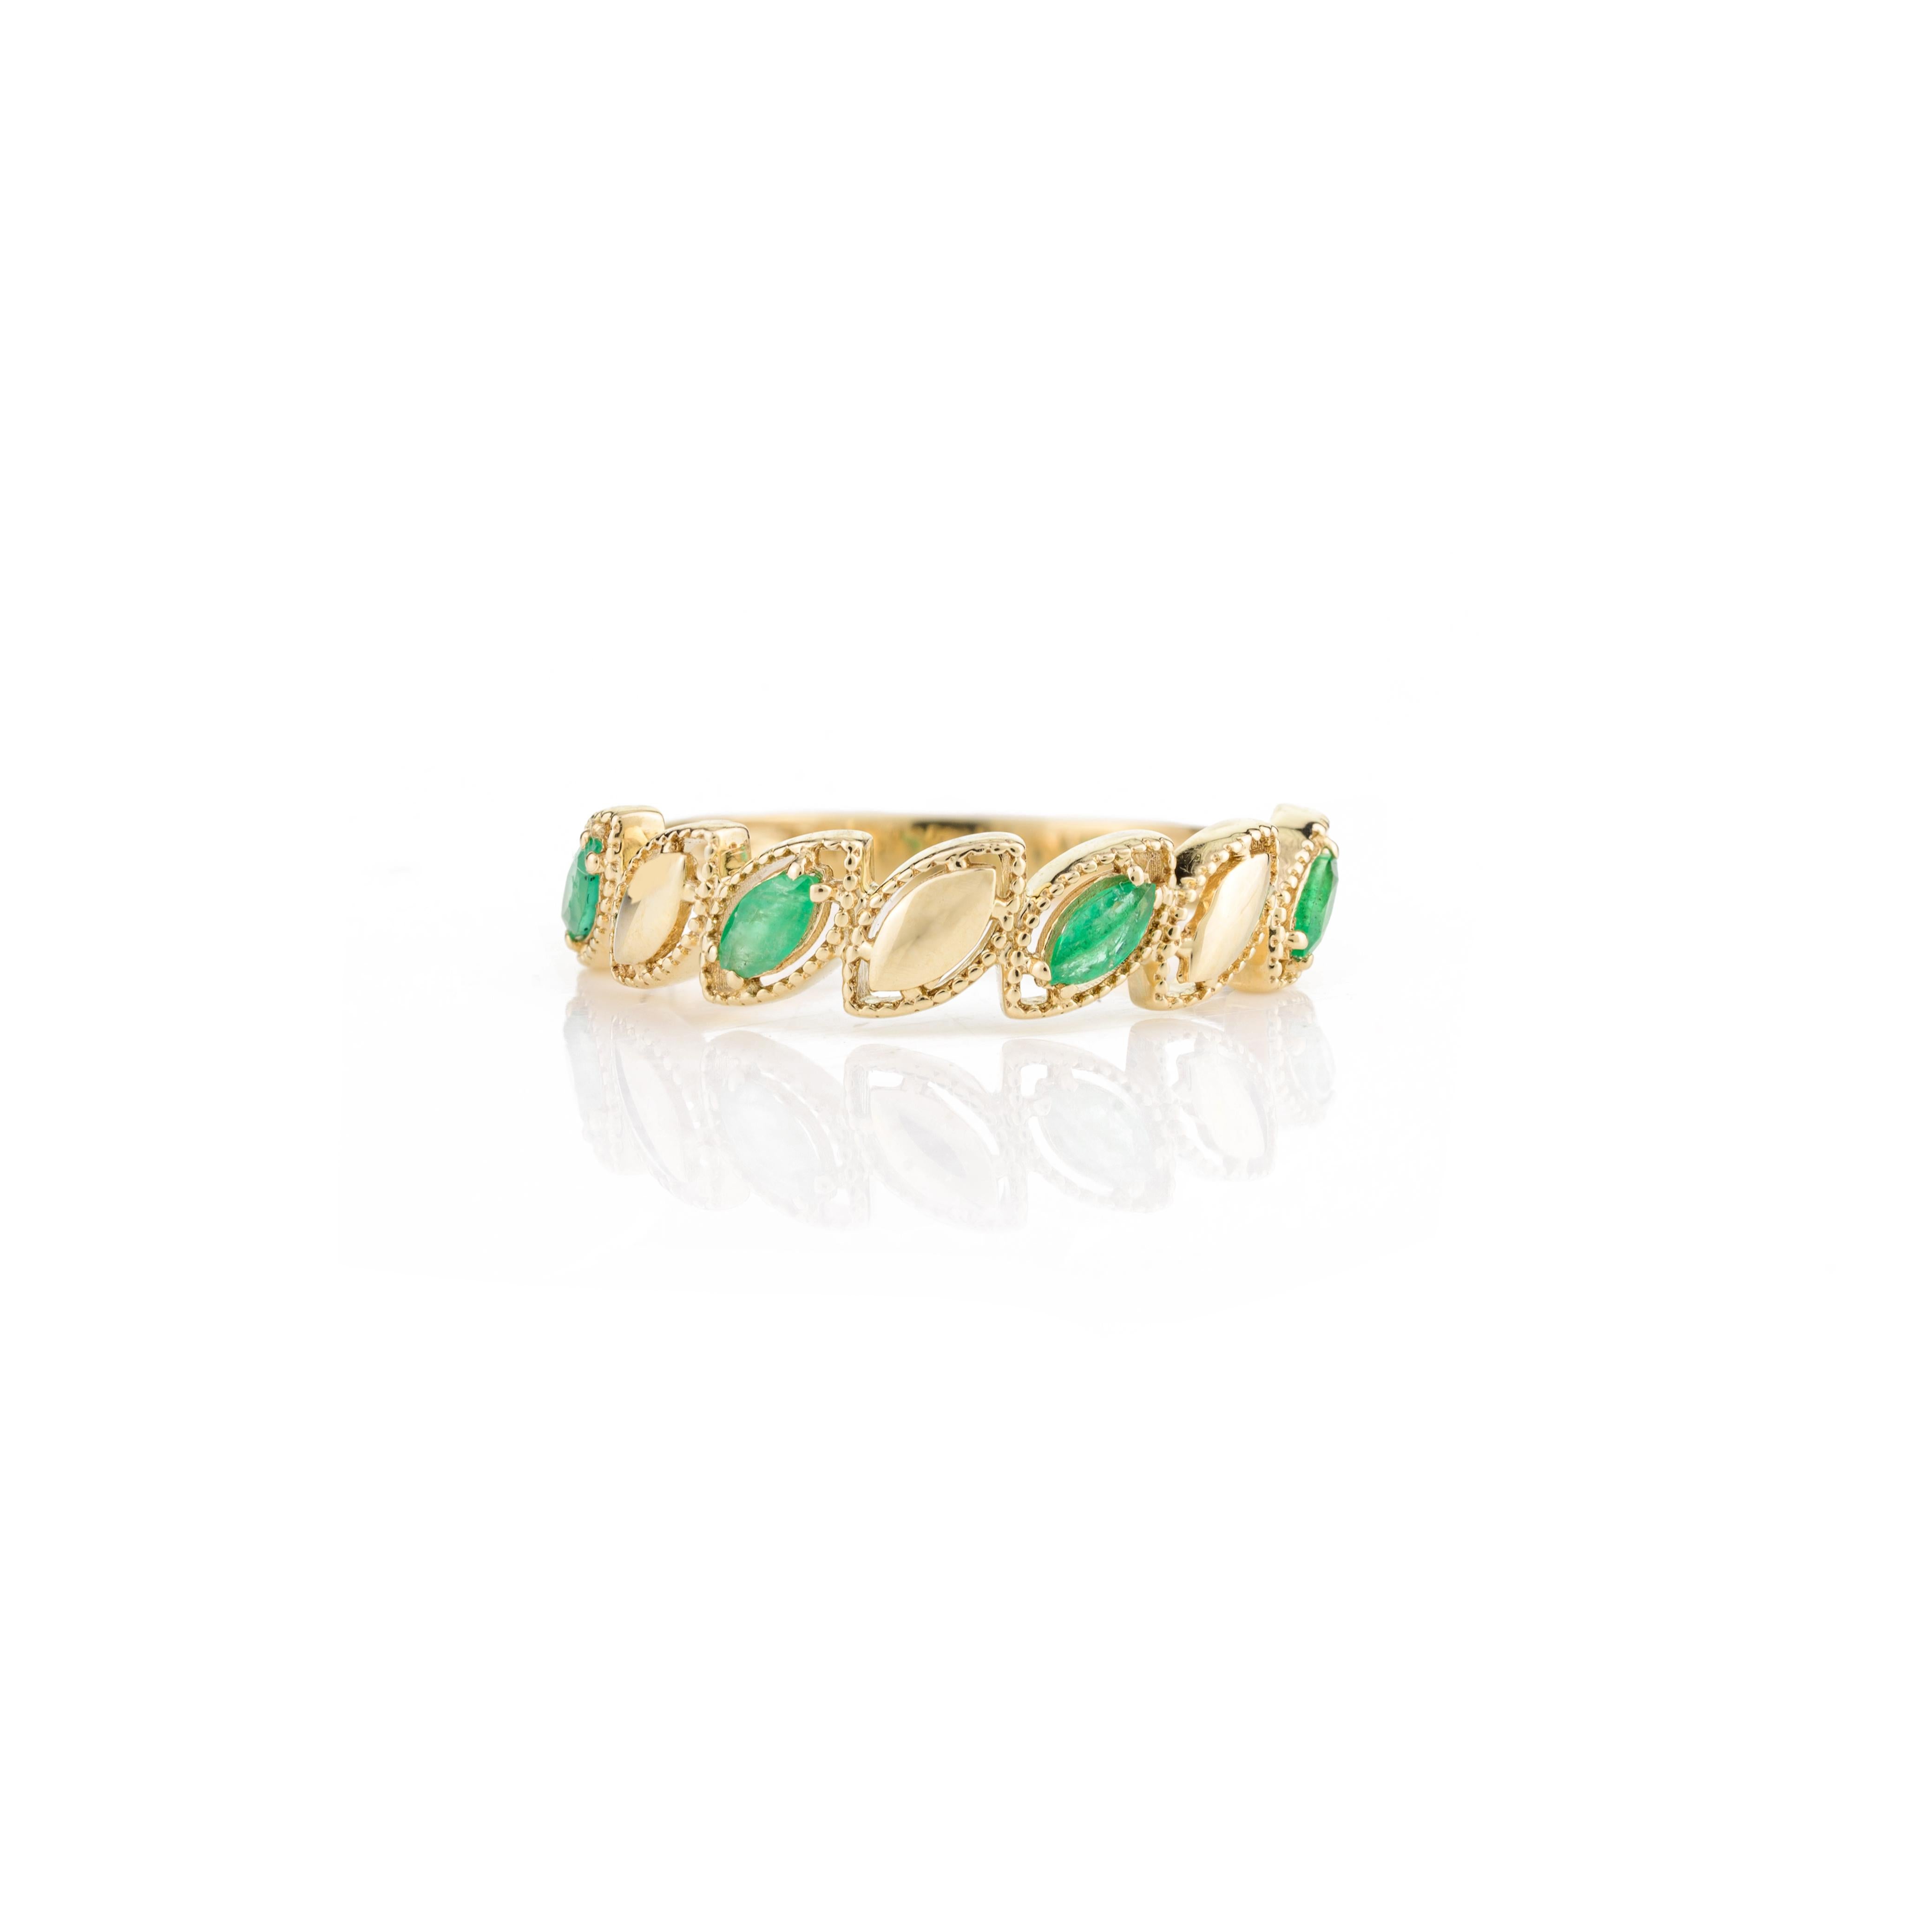 For Sale:  Delicate Emerald Birthstone Wedding Band Ring for Women in 14k Solid Yellow Gold 5